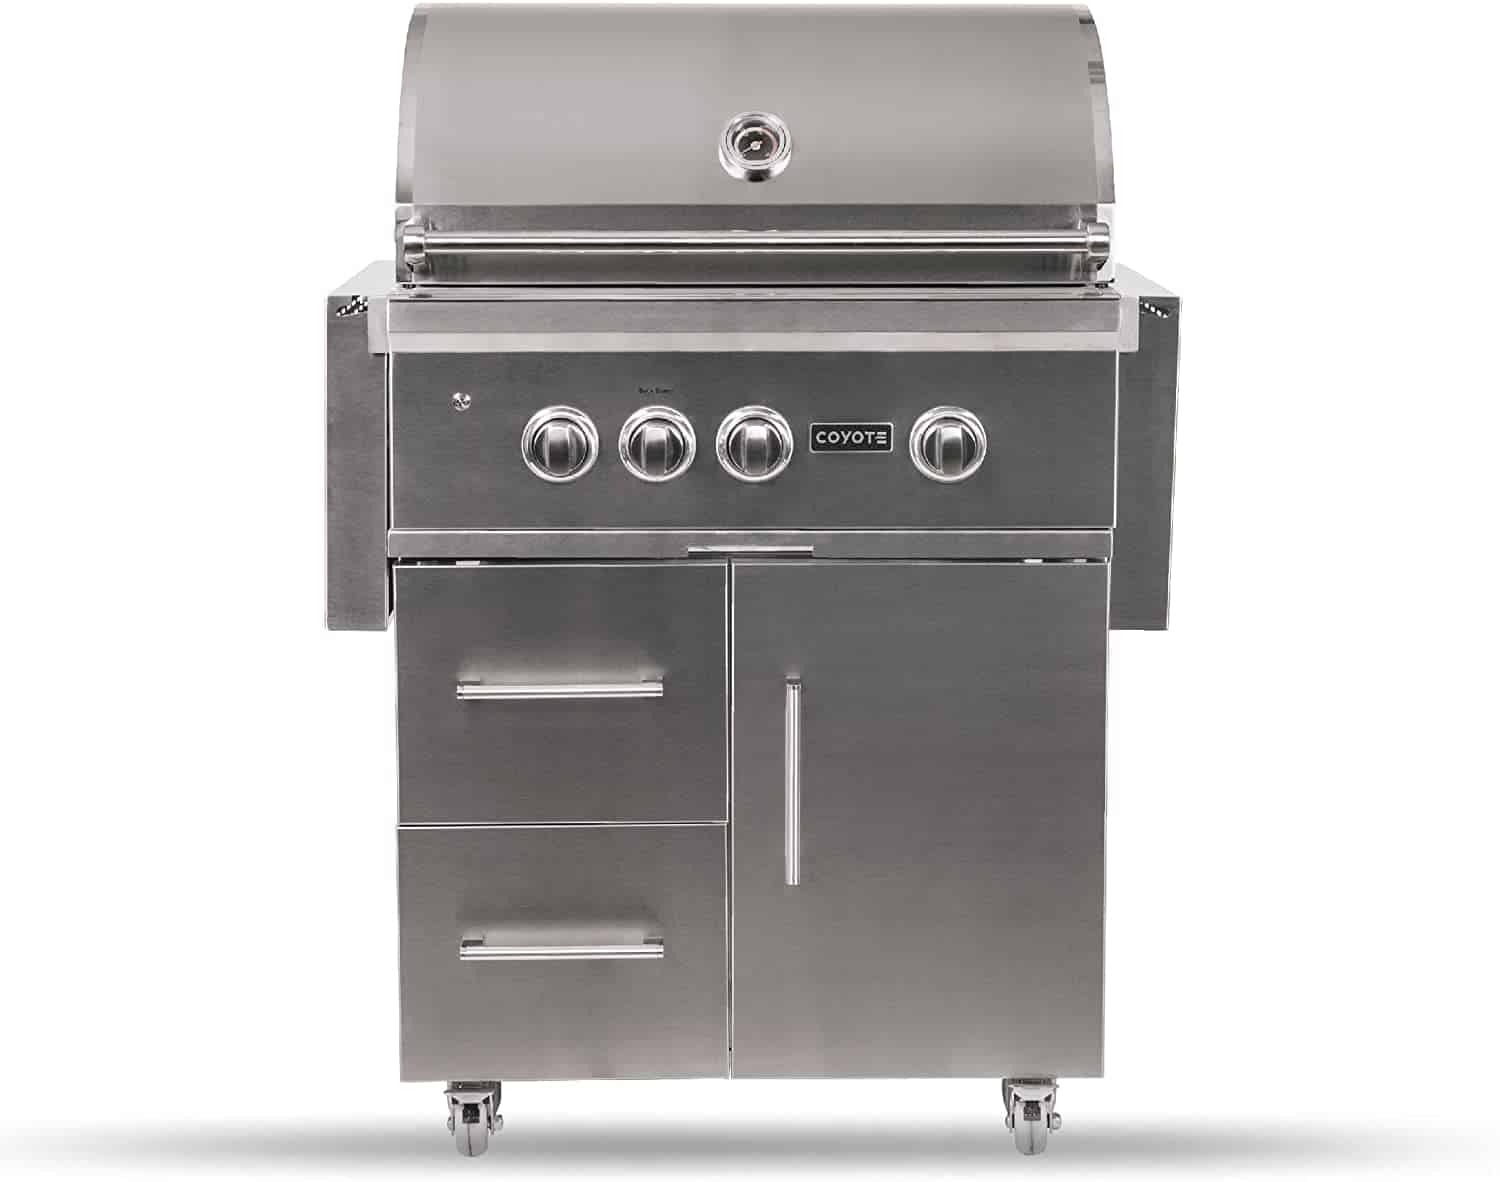 Best premium natural gas grill- Coyote S-Series Natural Gas Grill